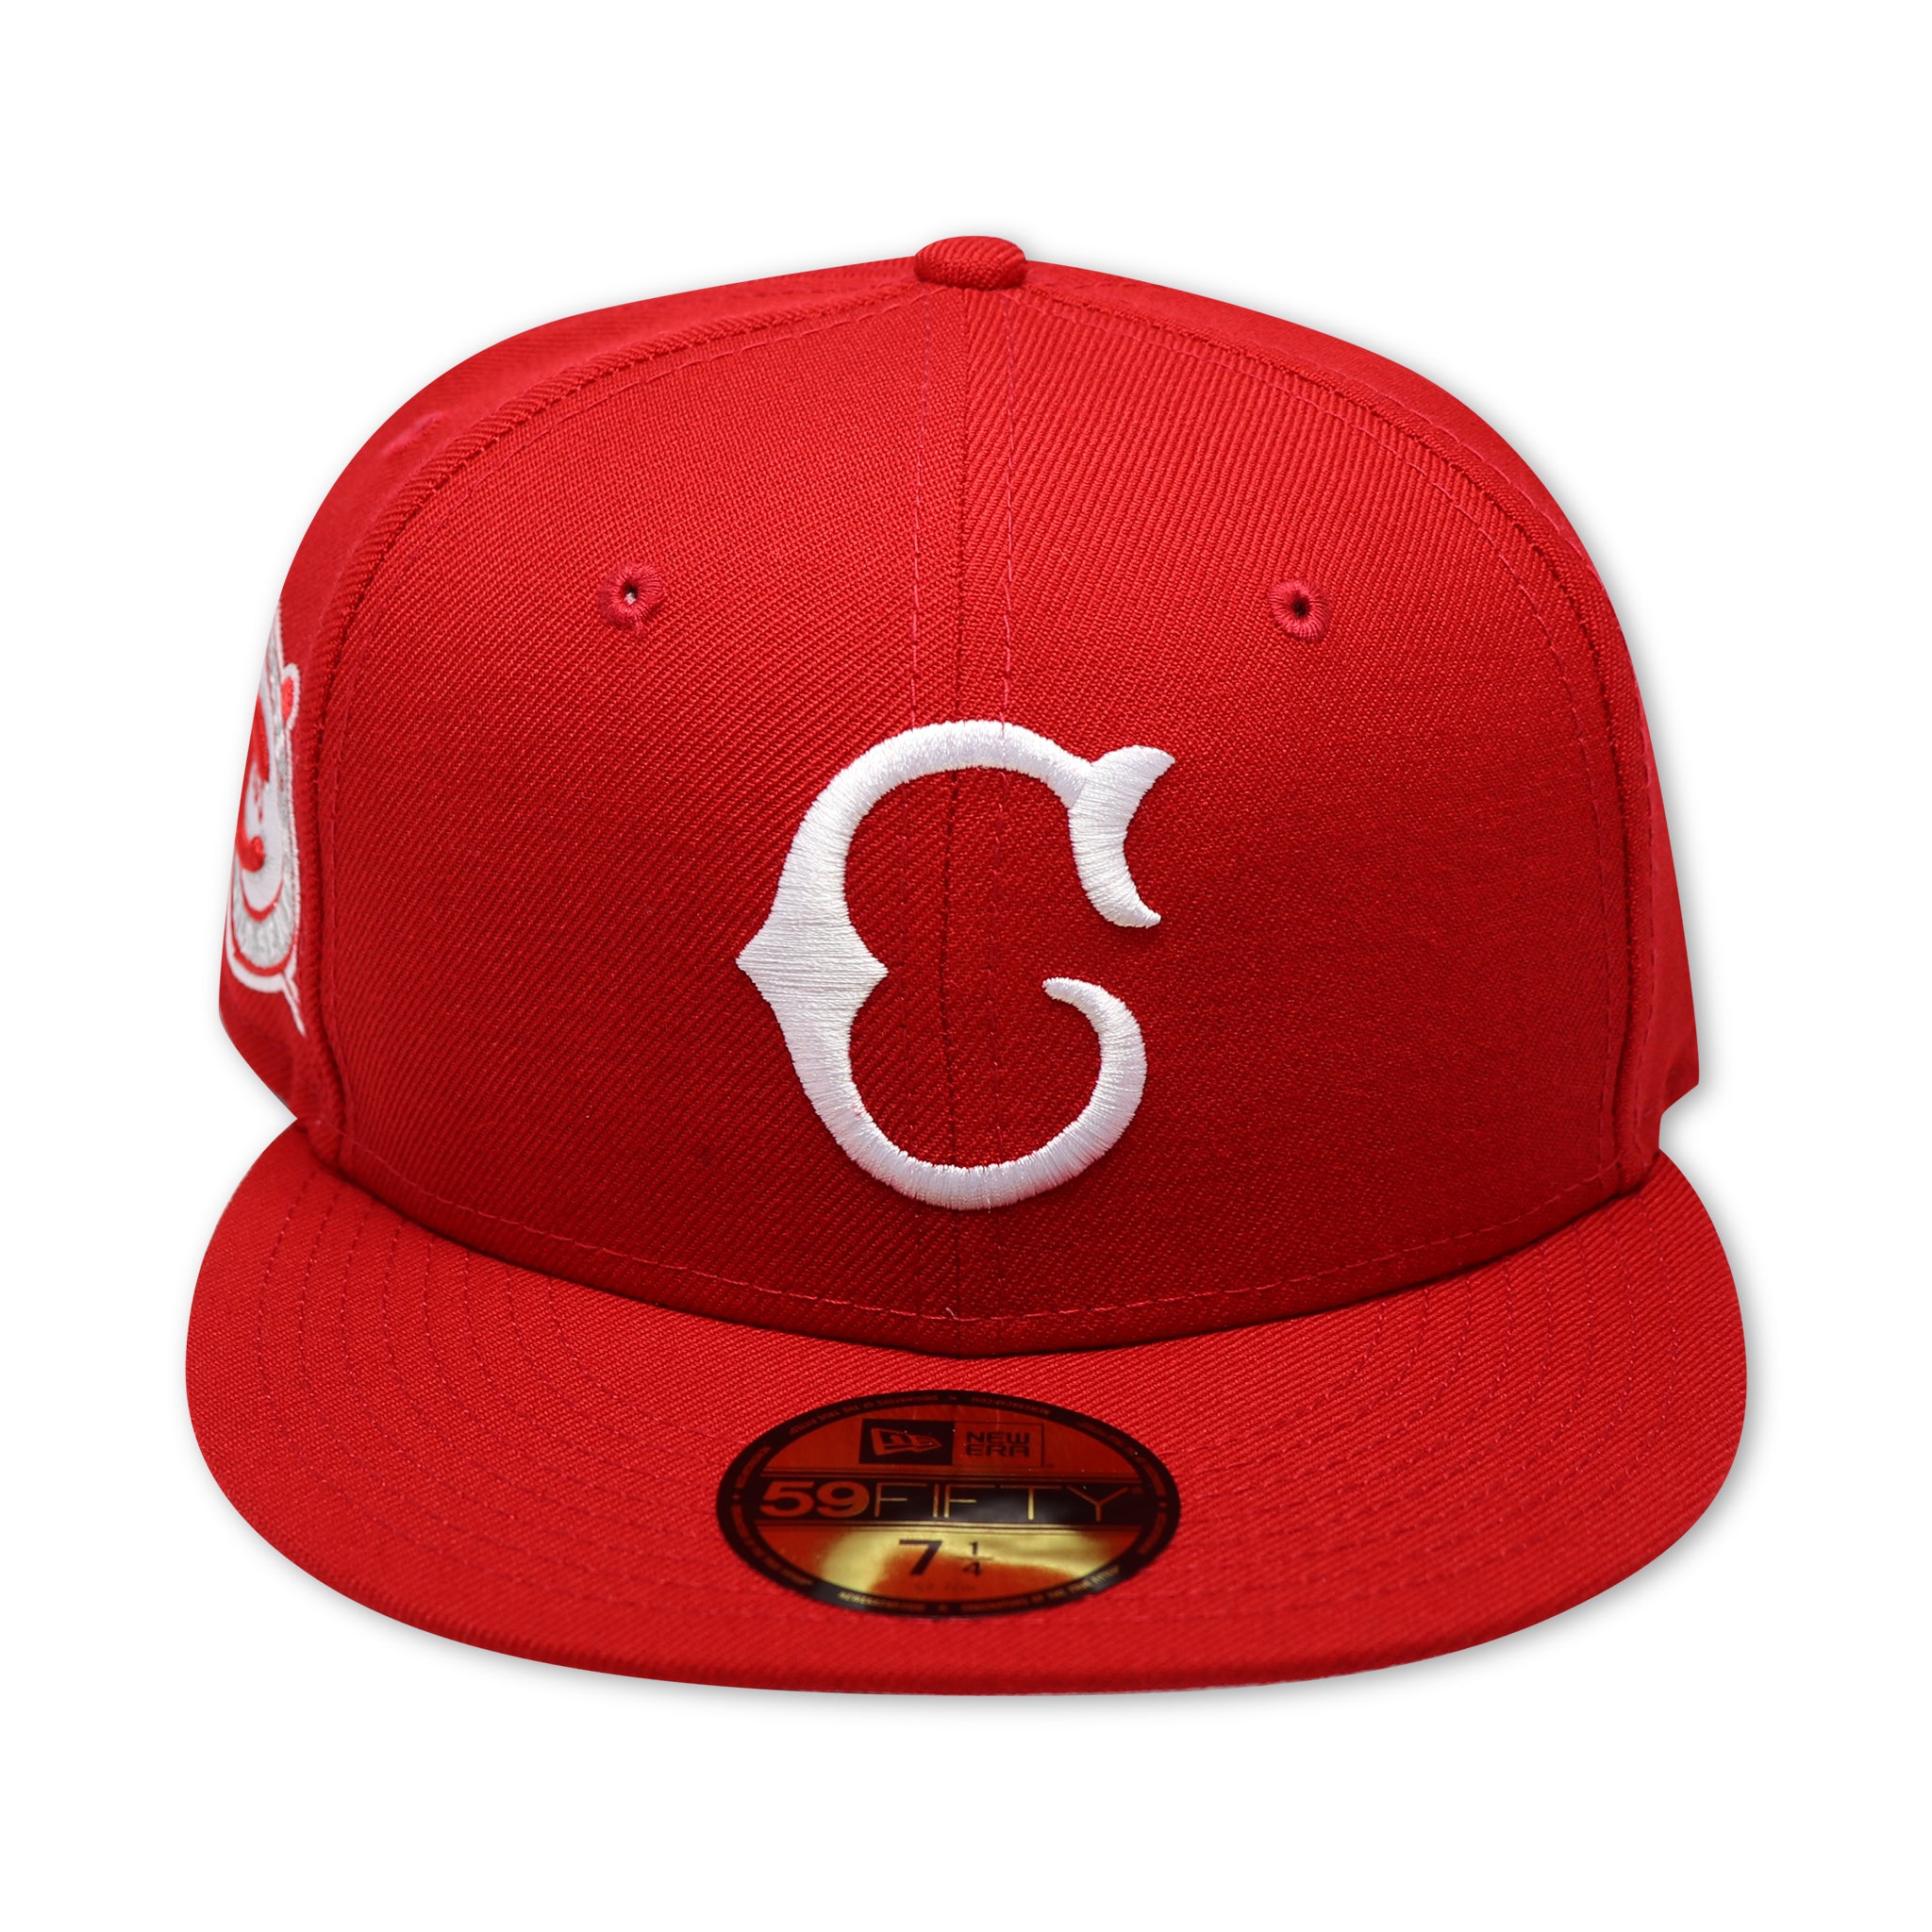 CINCINATTI REDS (COCA COLA) "1919 WORLDSERIES" NEW ERA 59FIFTY FITTED (SILVER BOTTOM) (S)